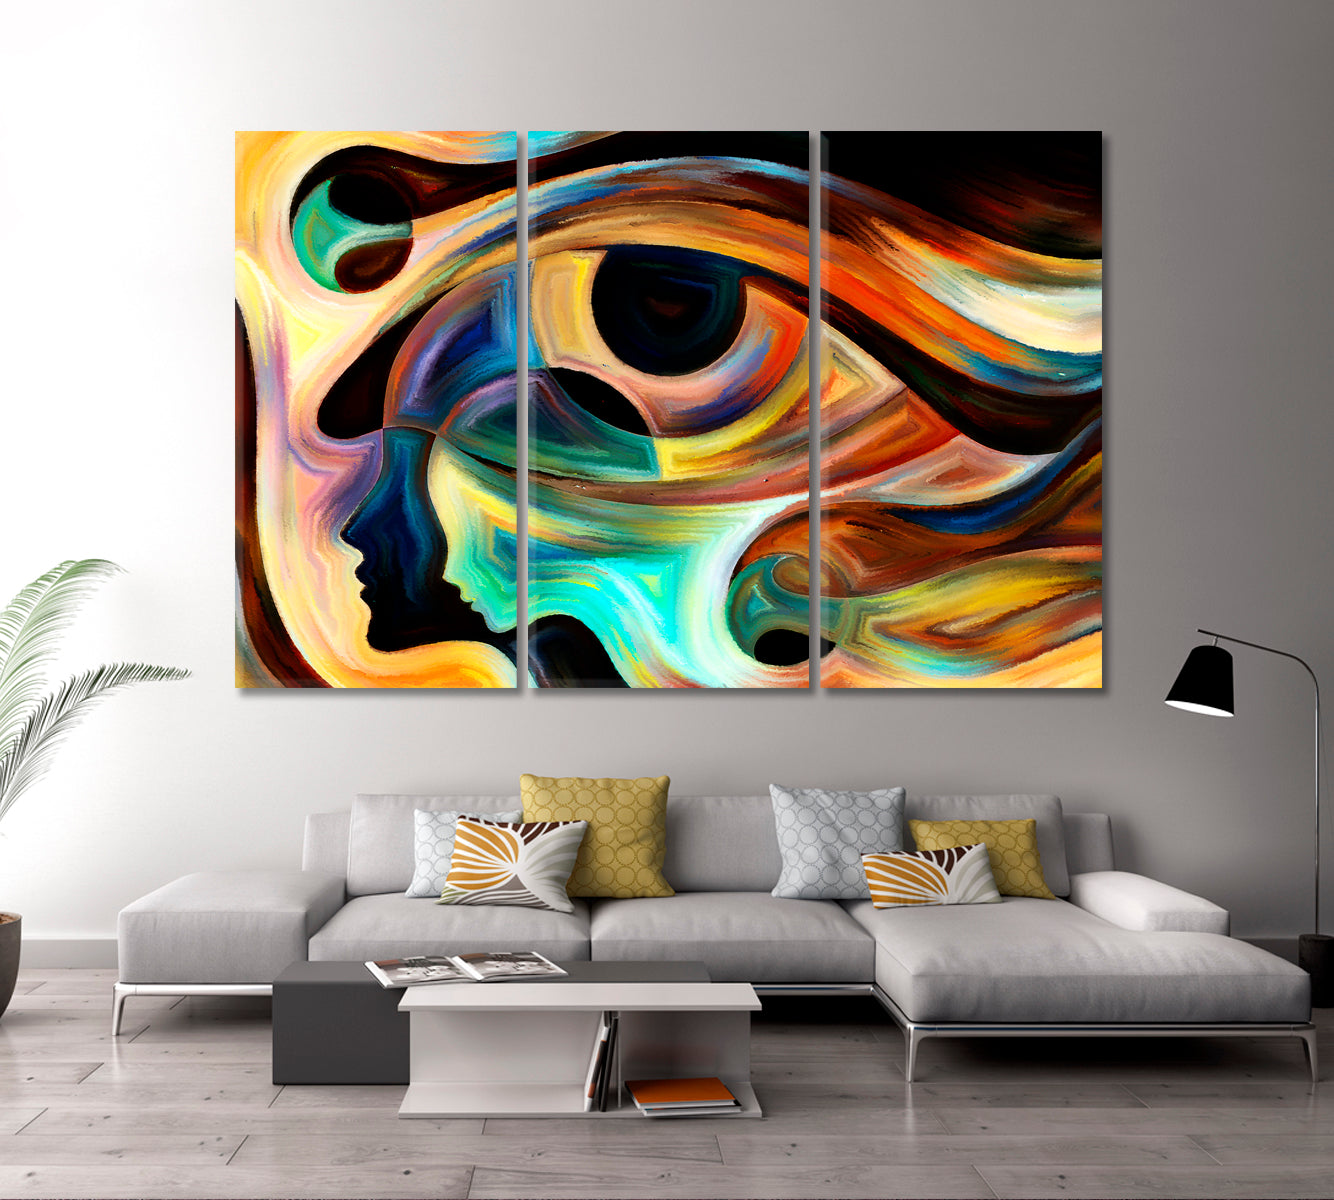 Woman and Child Human Eye Abstract Beautiful Lines Consciousness Art Artesty 3 panels 36" x 24" 